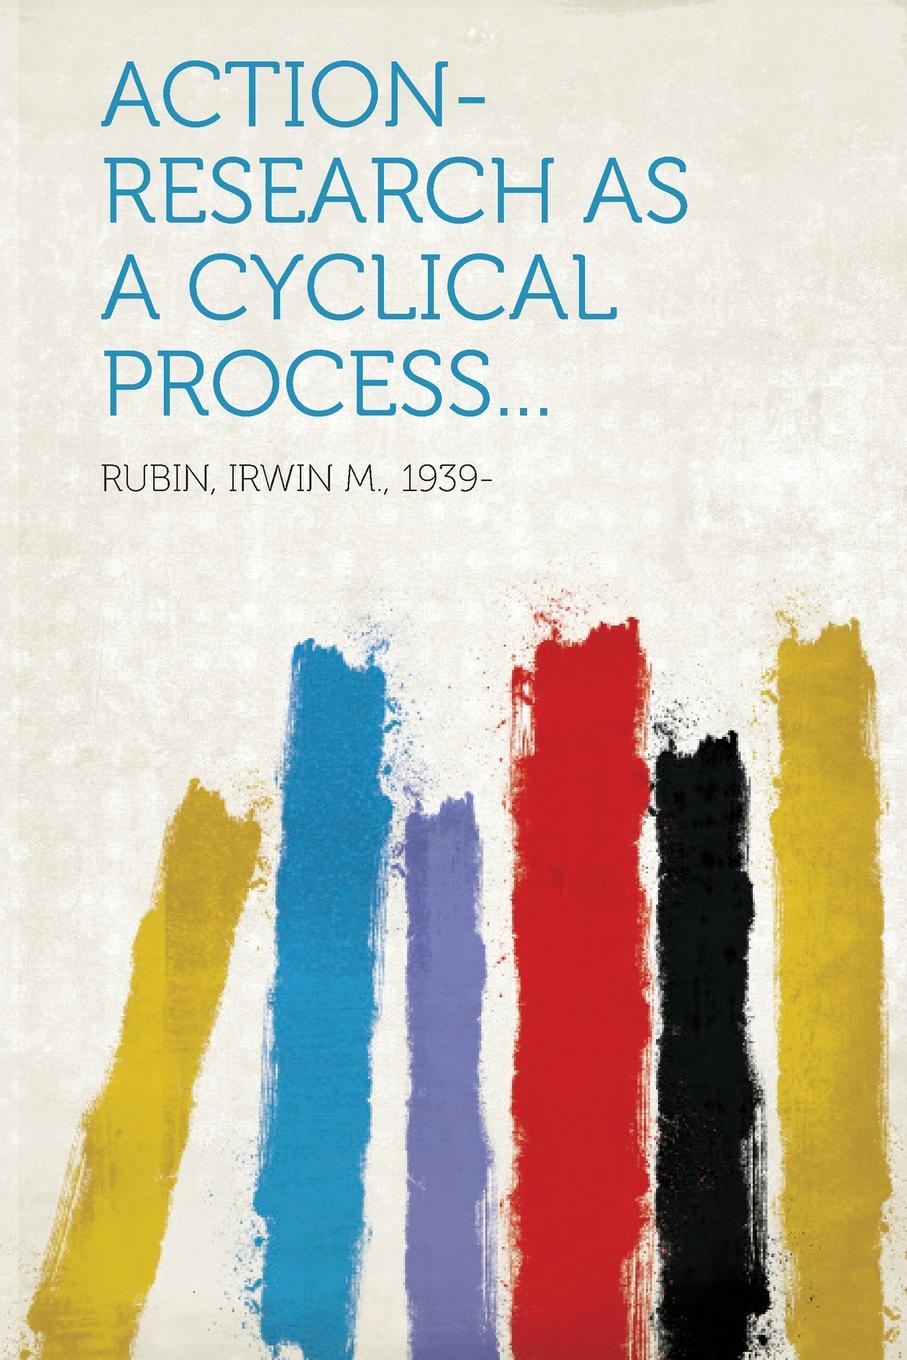 Action-research as a cyclical process...